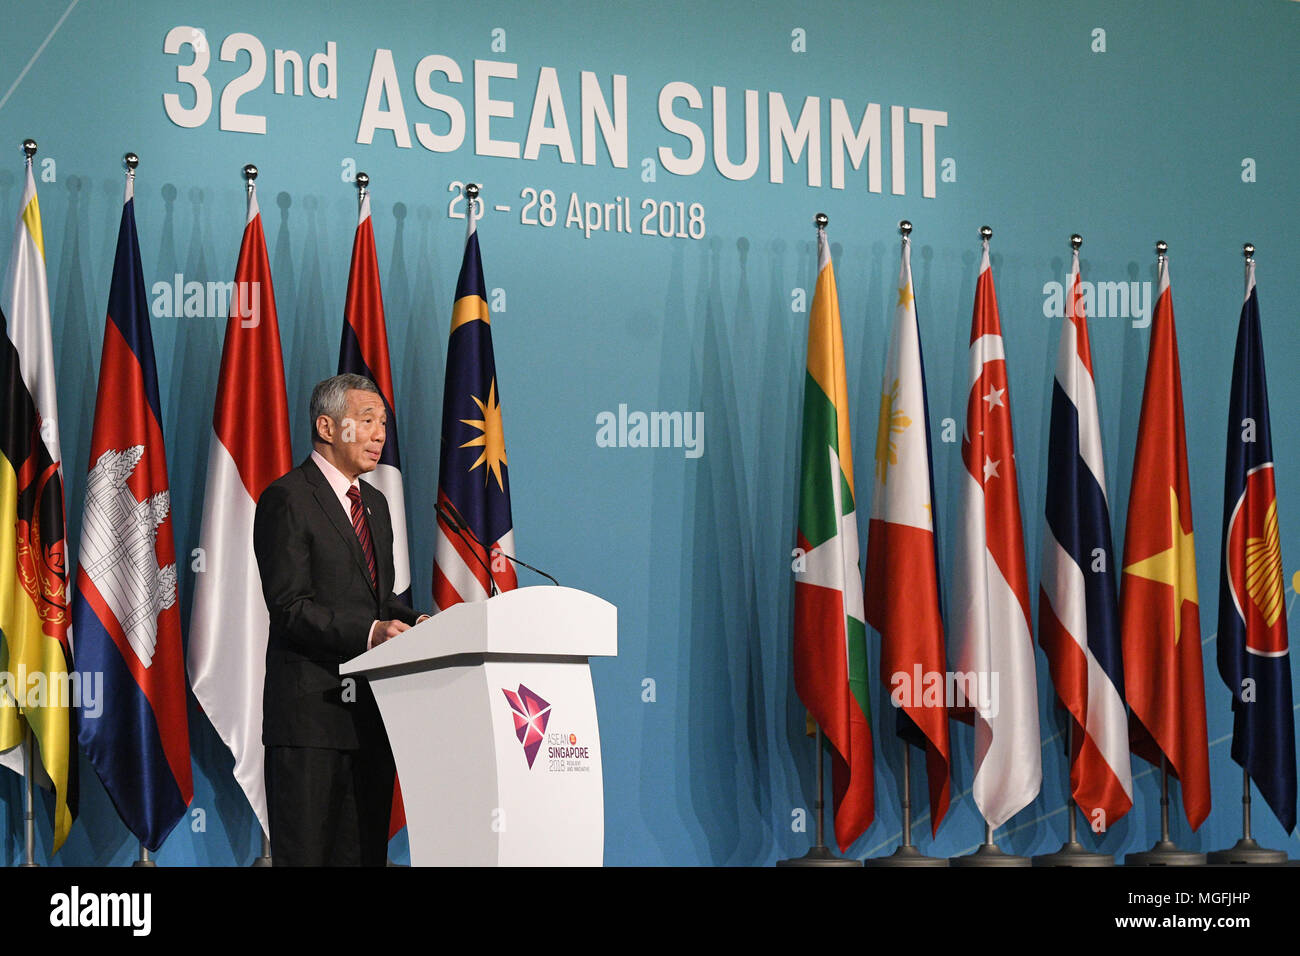 Singapore. 28th Apr, 2018. Singapore's Prime Minister Lee Hsien Loong speaks during a press conference of the 32nd ASEAN Summit held in Singapore on April 28, 2018. The 32nd summit of the Association of Southeast Asian Nations (ASEAN) concluded here Saturday, reaffirming the bloc's cooperation and common vision. Credit: Then Chih Wey/Xinhua/Alamy Live News Stock Photo